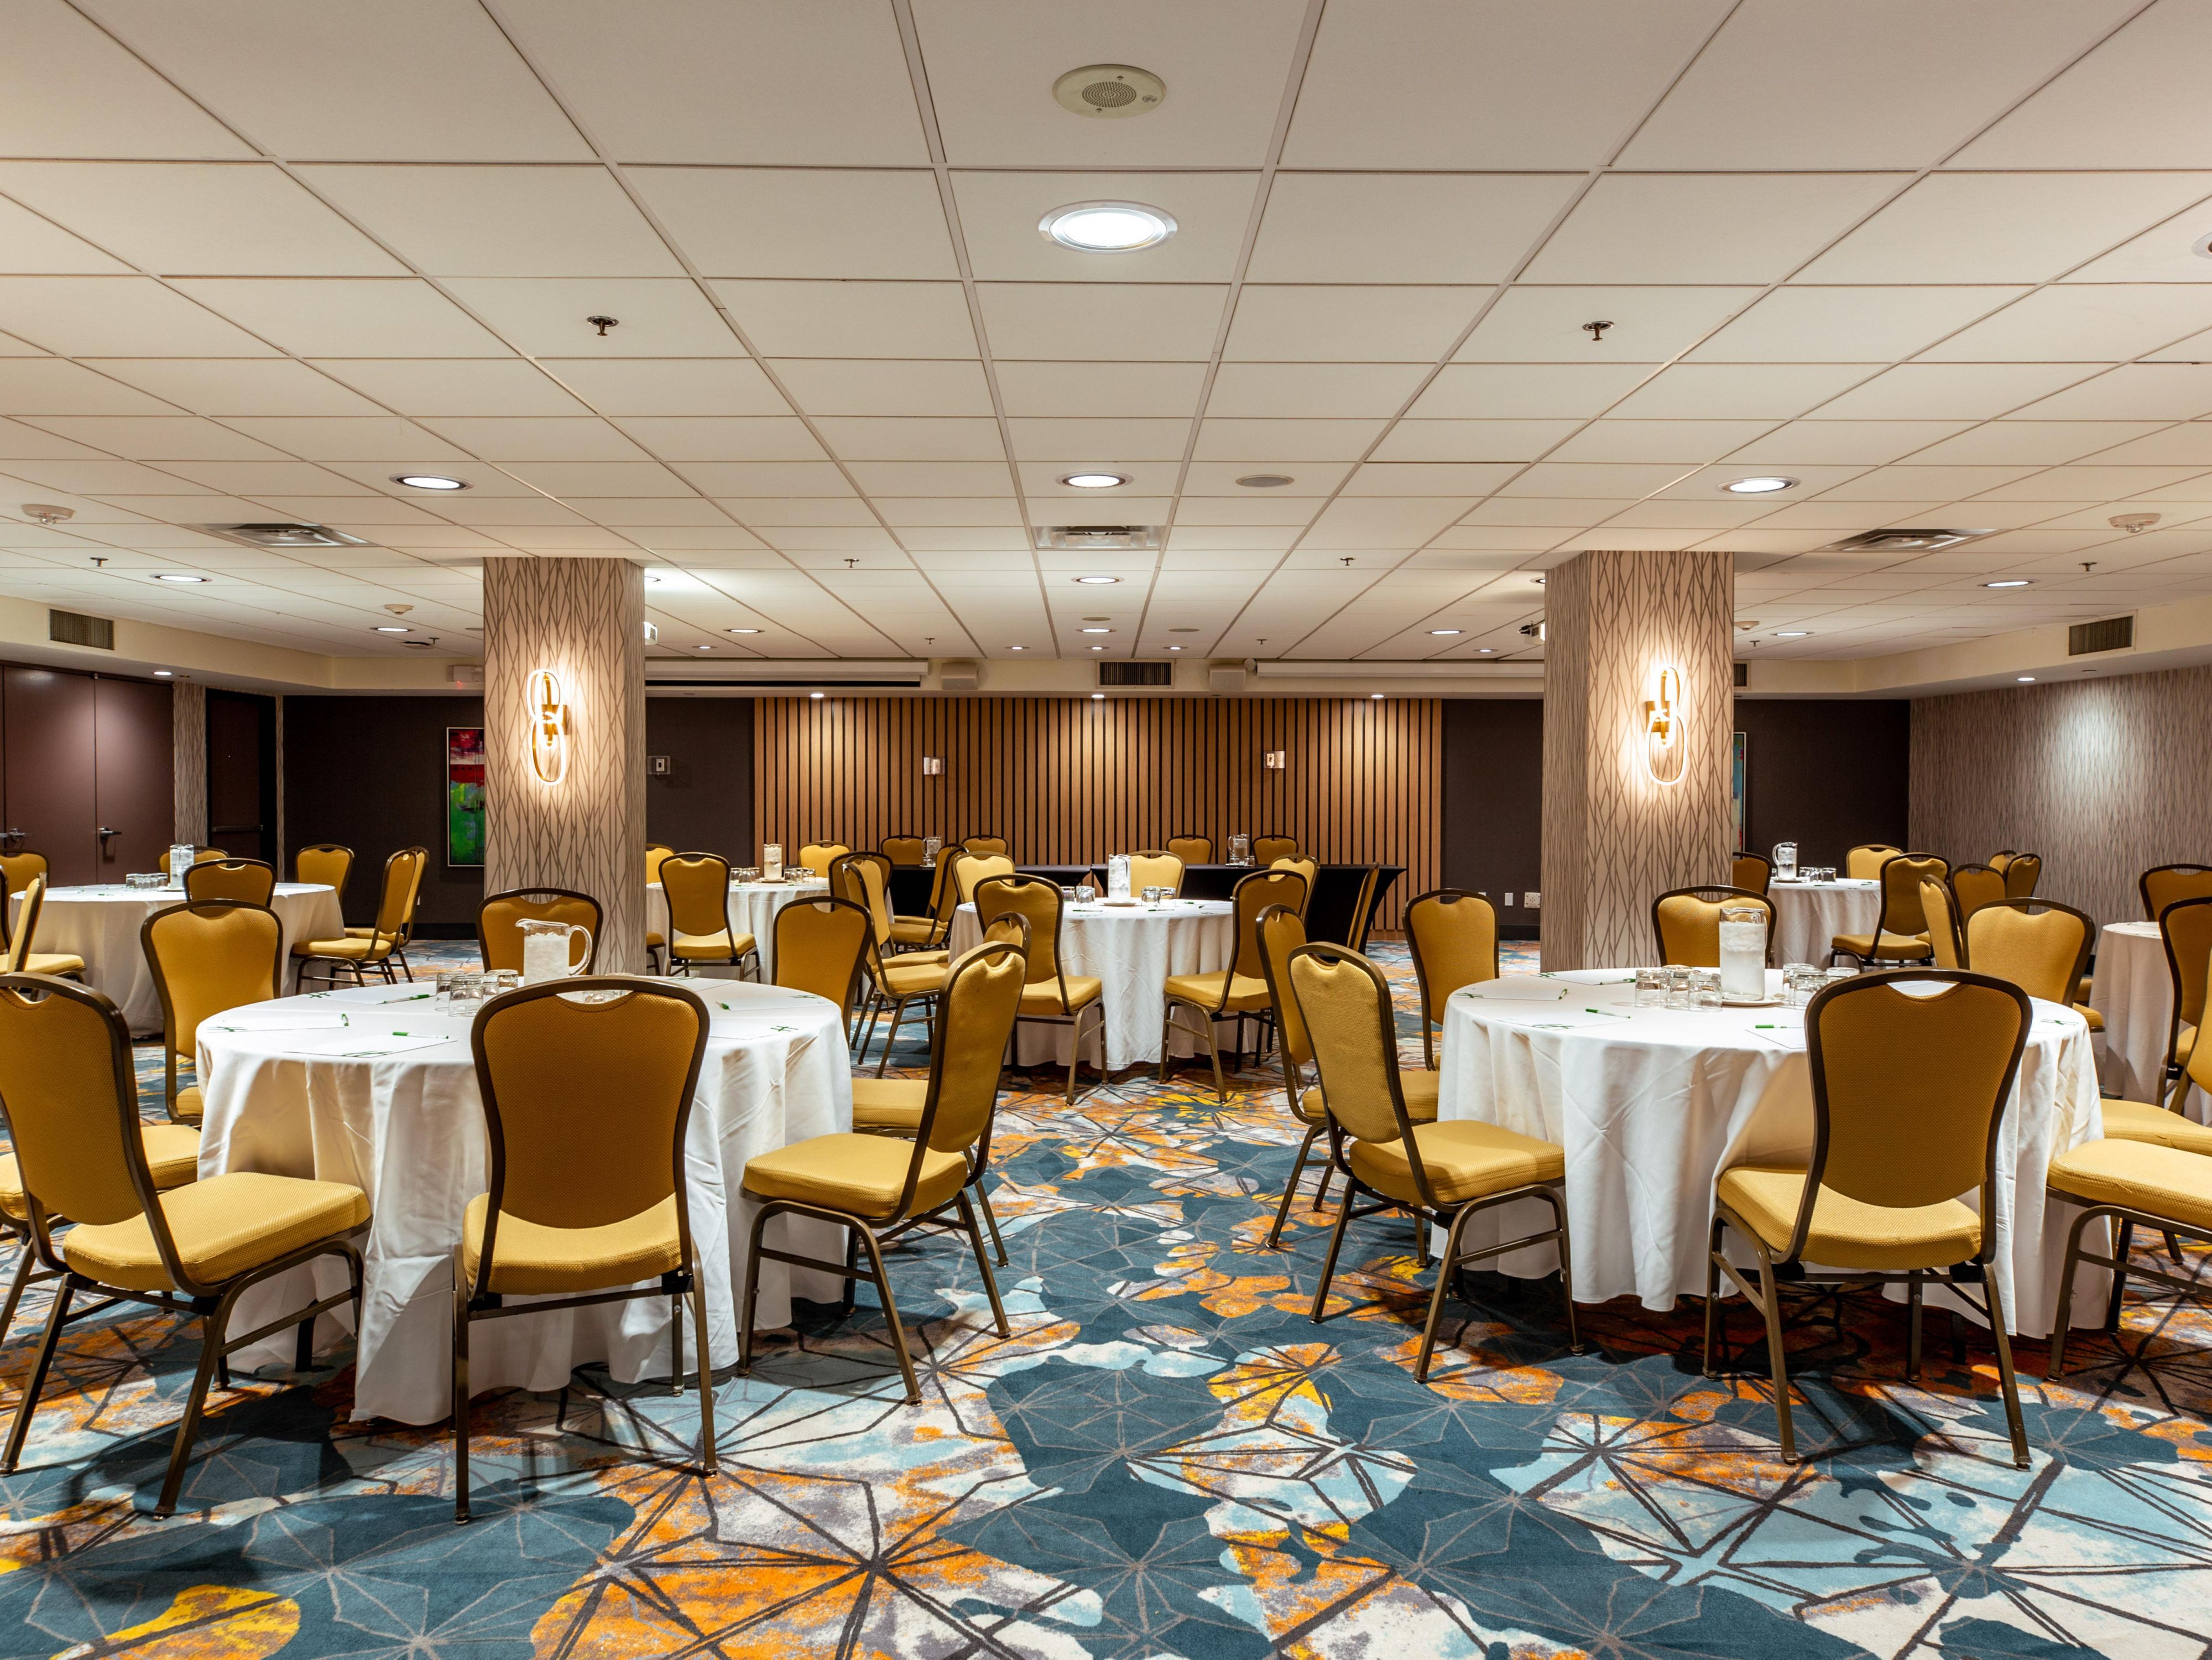 Whether your event is for 10 people or 300 people we have the ideal banquet space to host all types of meetings, conferences, or events.  Let our dedicated team of Sales and Catering professionals assist you in planning the perfect event.  Call us today for a tour of our event space!